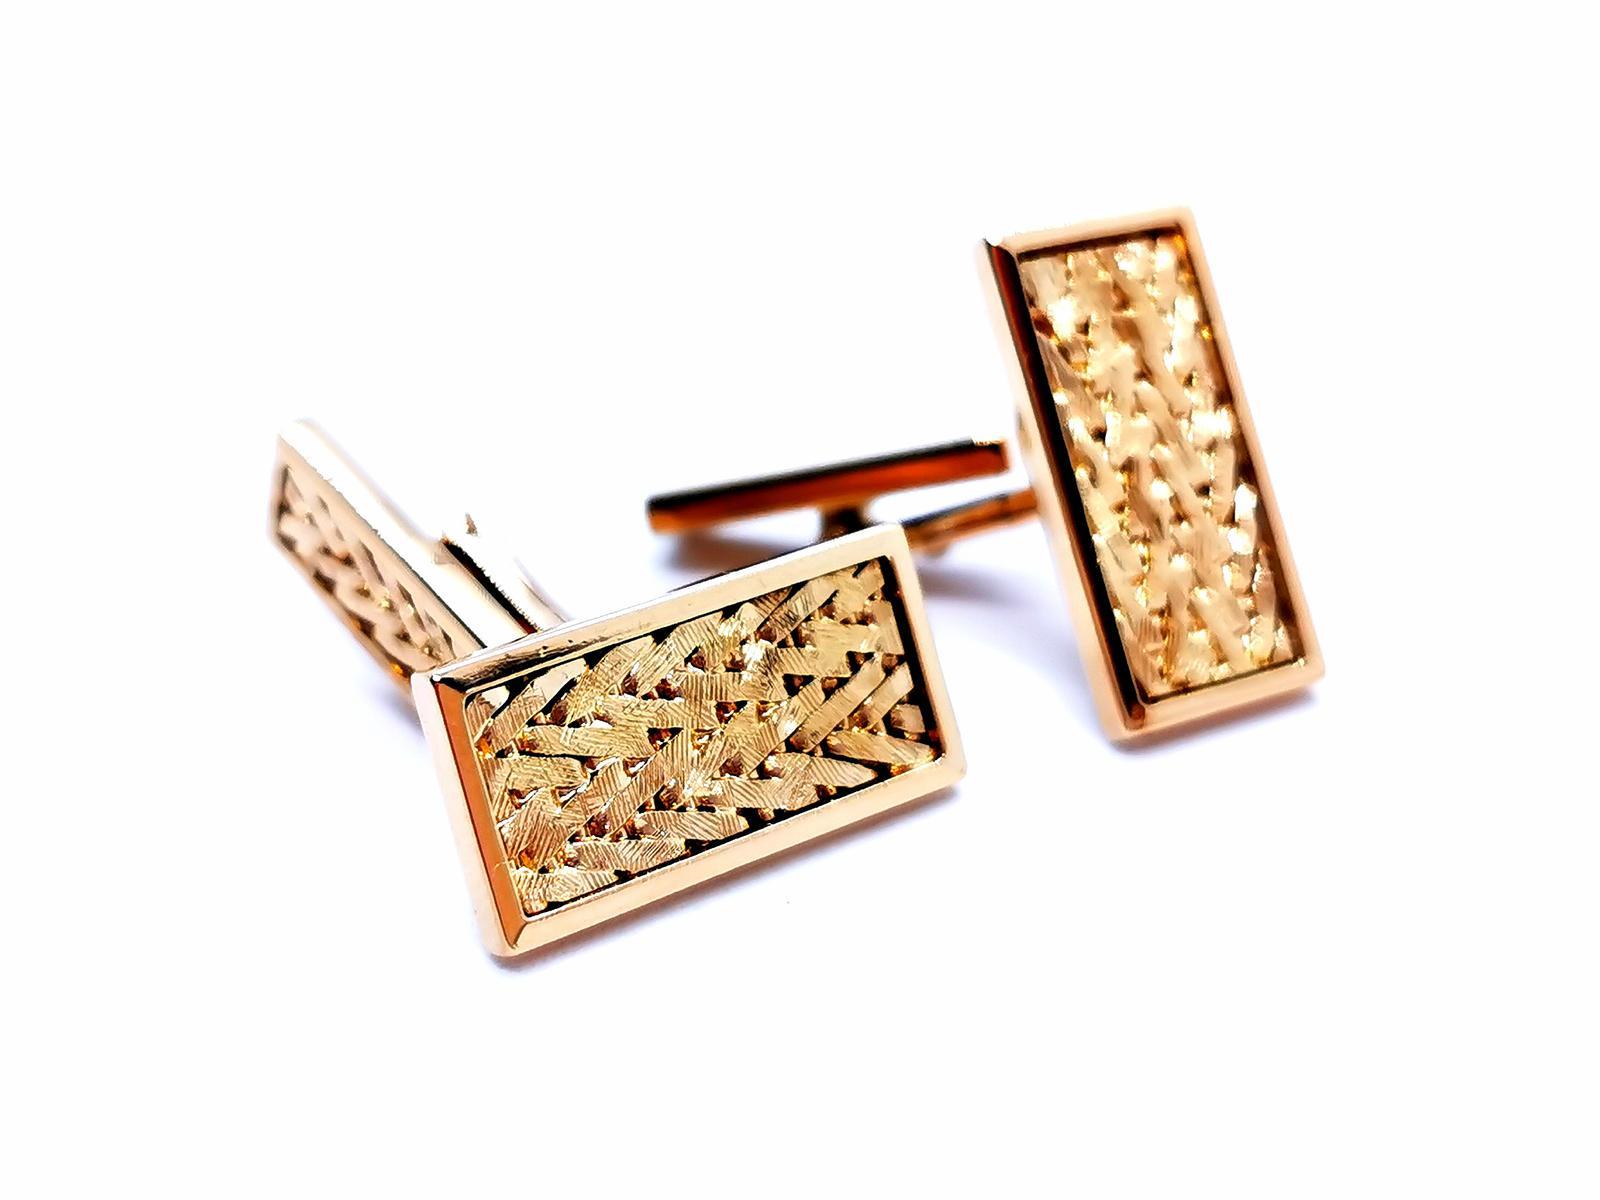 Cufflinks. gold yellow 750 mils (18 carats). dimensions 2.15 cm x 0.96 cm. wide rectangular pattern dimensions: 1.97 cm x 0.96 cm. total weight: 15.94 g. punch eagle head. excellent condition
